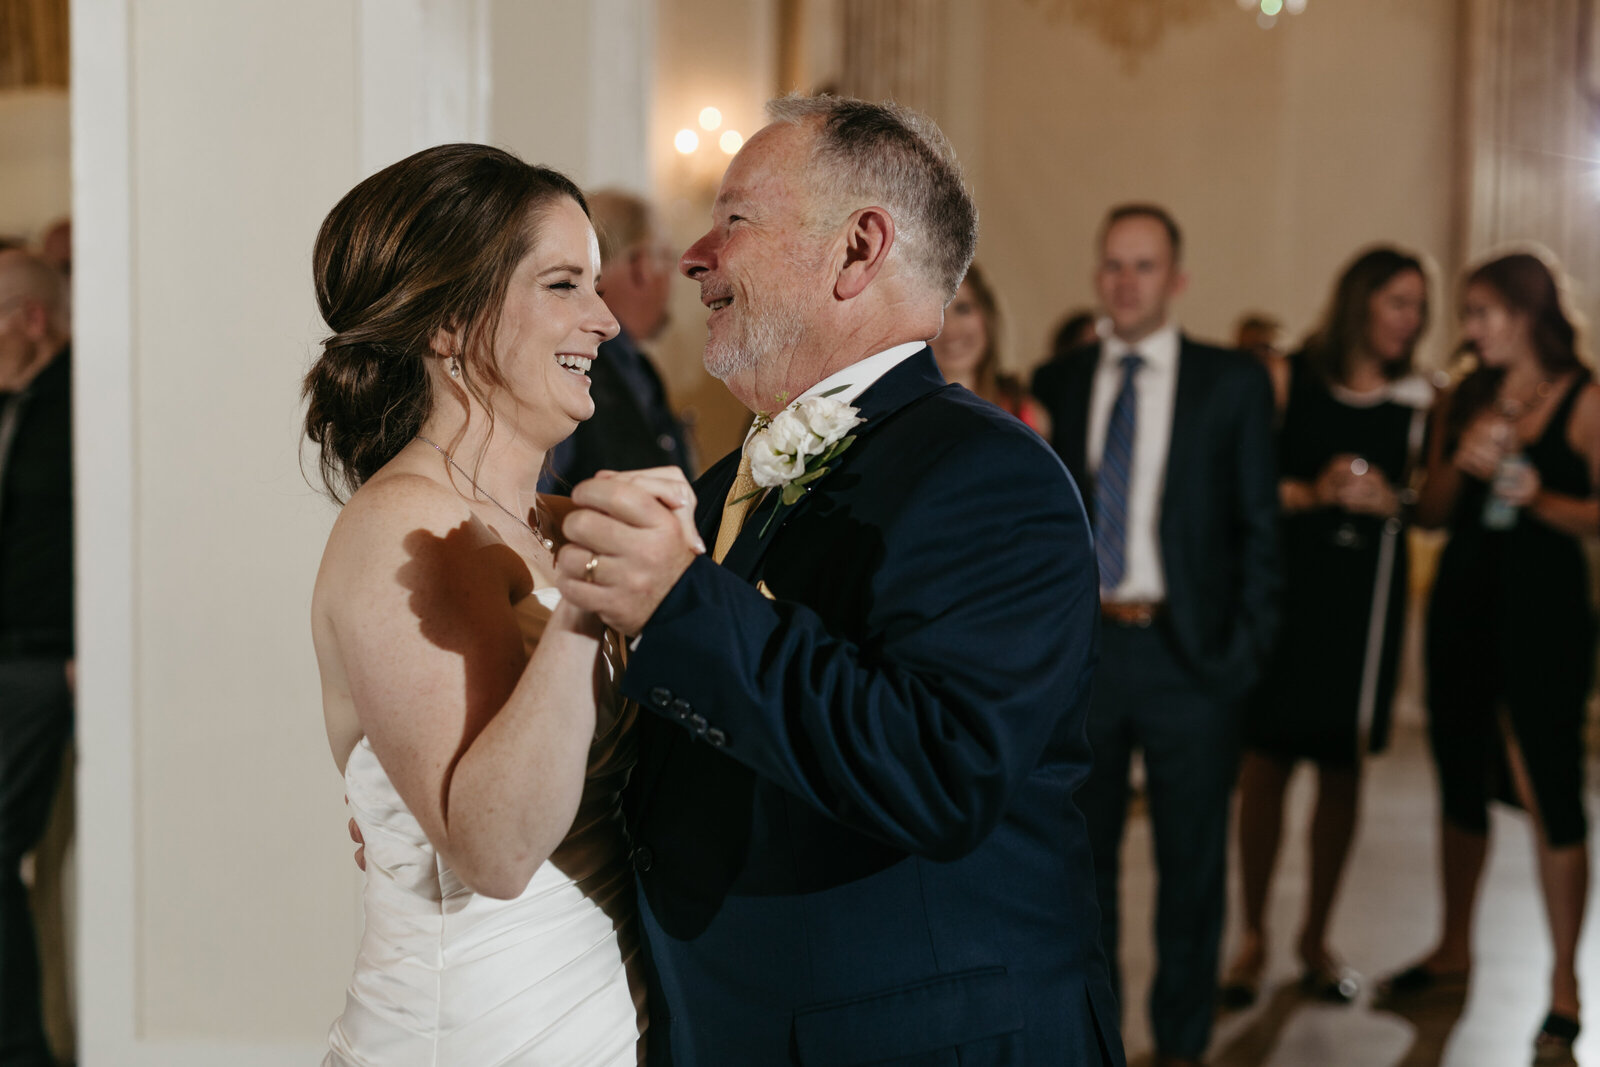 A bride dances with her father at a wedding reception in a ballroom